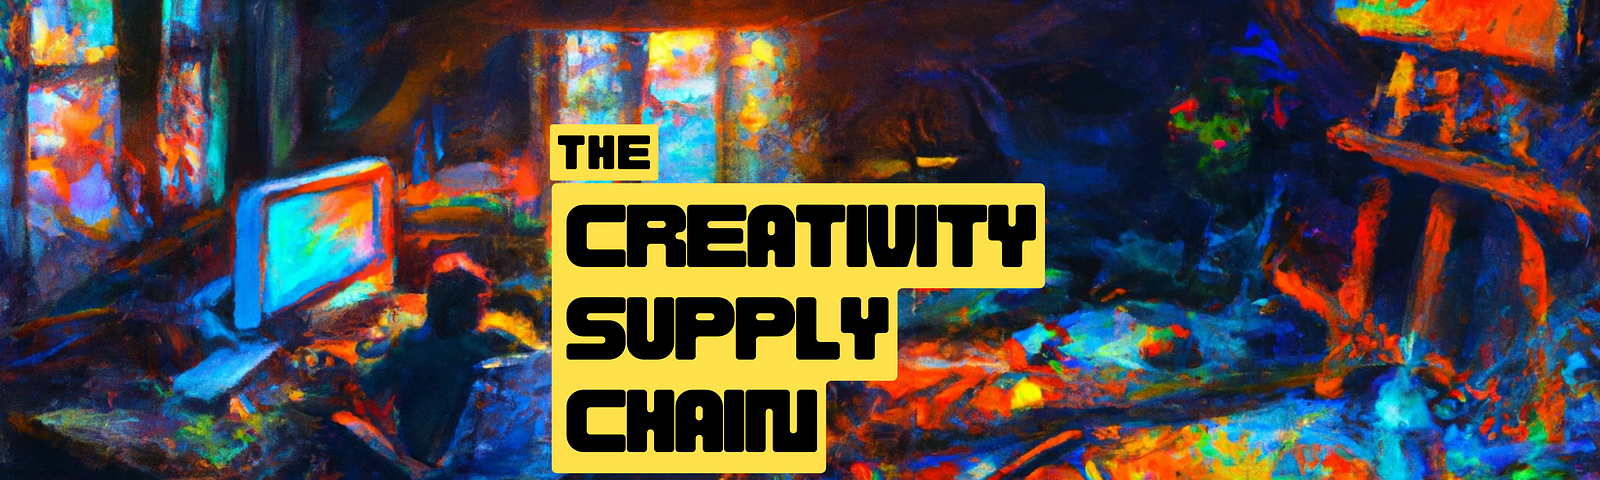 Title image for the essay, The Creativity Supply Chain, by Michael Mignano. Text overlaying a painting of an artist abandoning their art supplies for a computer.